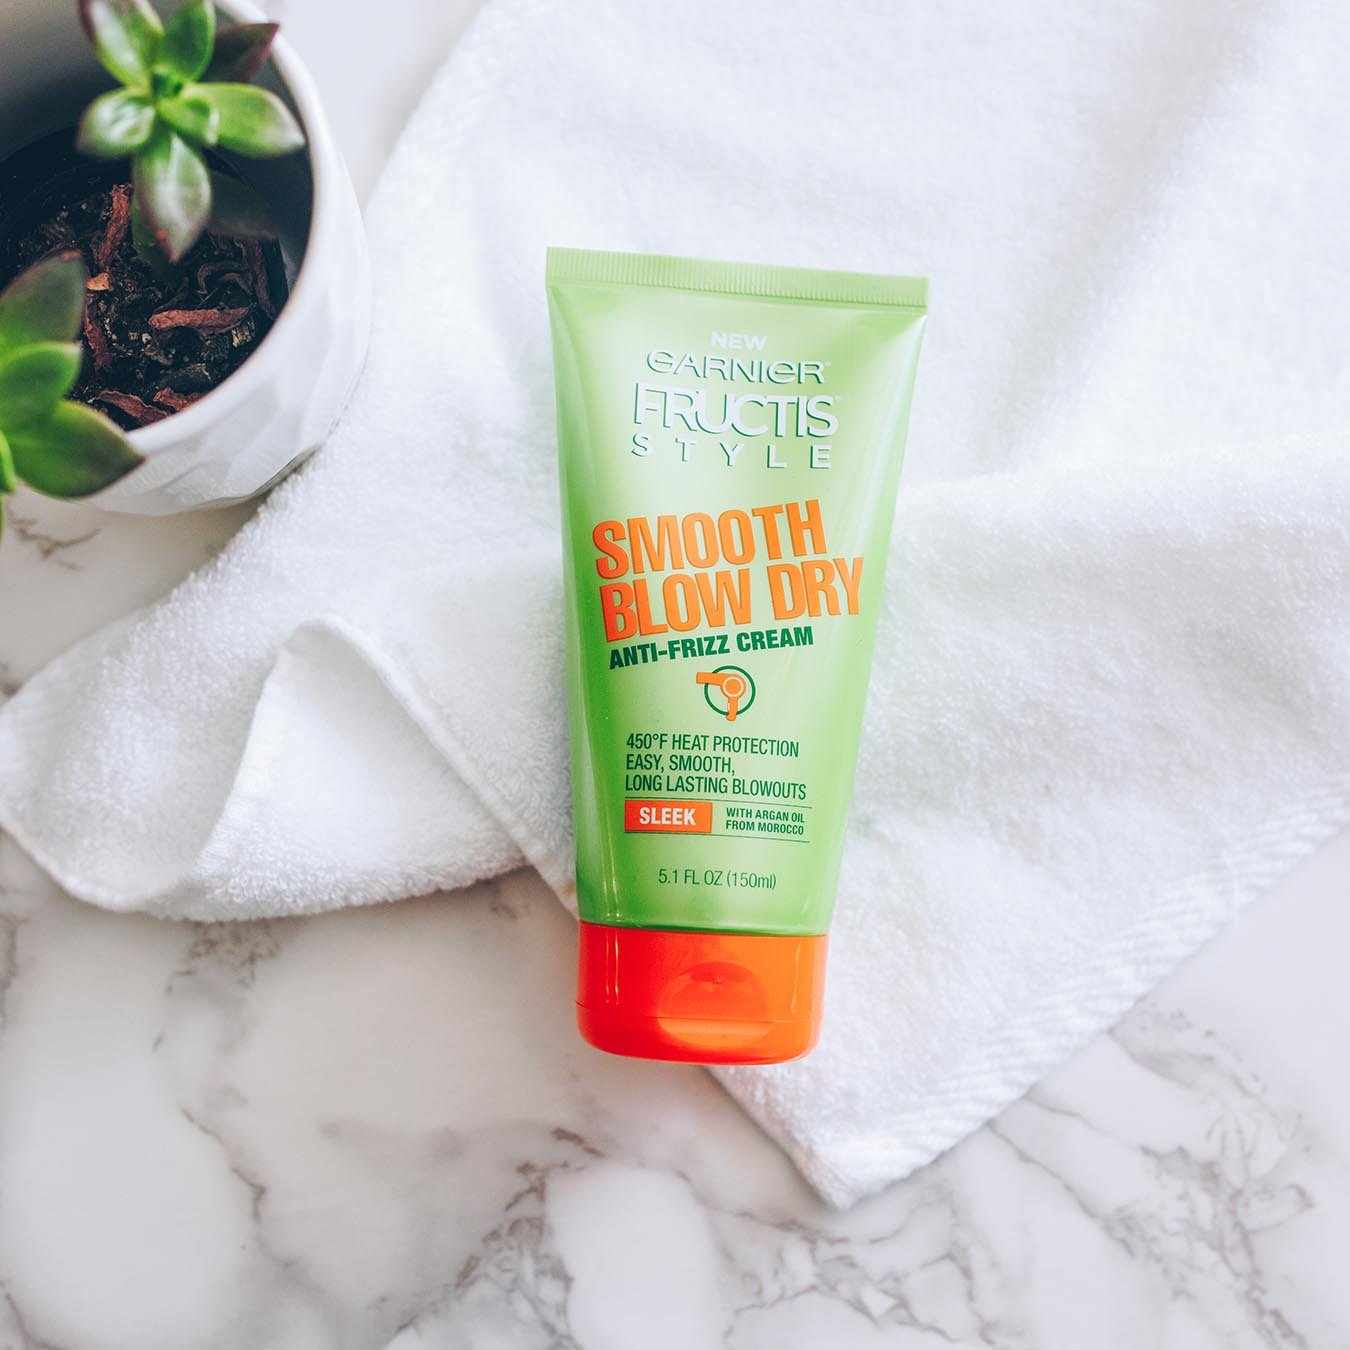 Garnier Fructis Style Smooth Blow Dry Anti-Frizz Cream on a white hand towel on white marble next to a succulent planted in a white faceted pot.